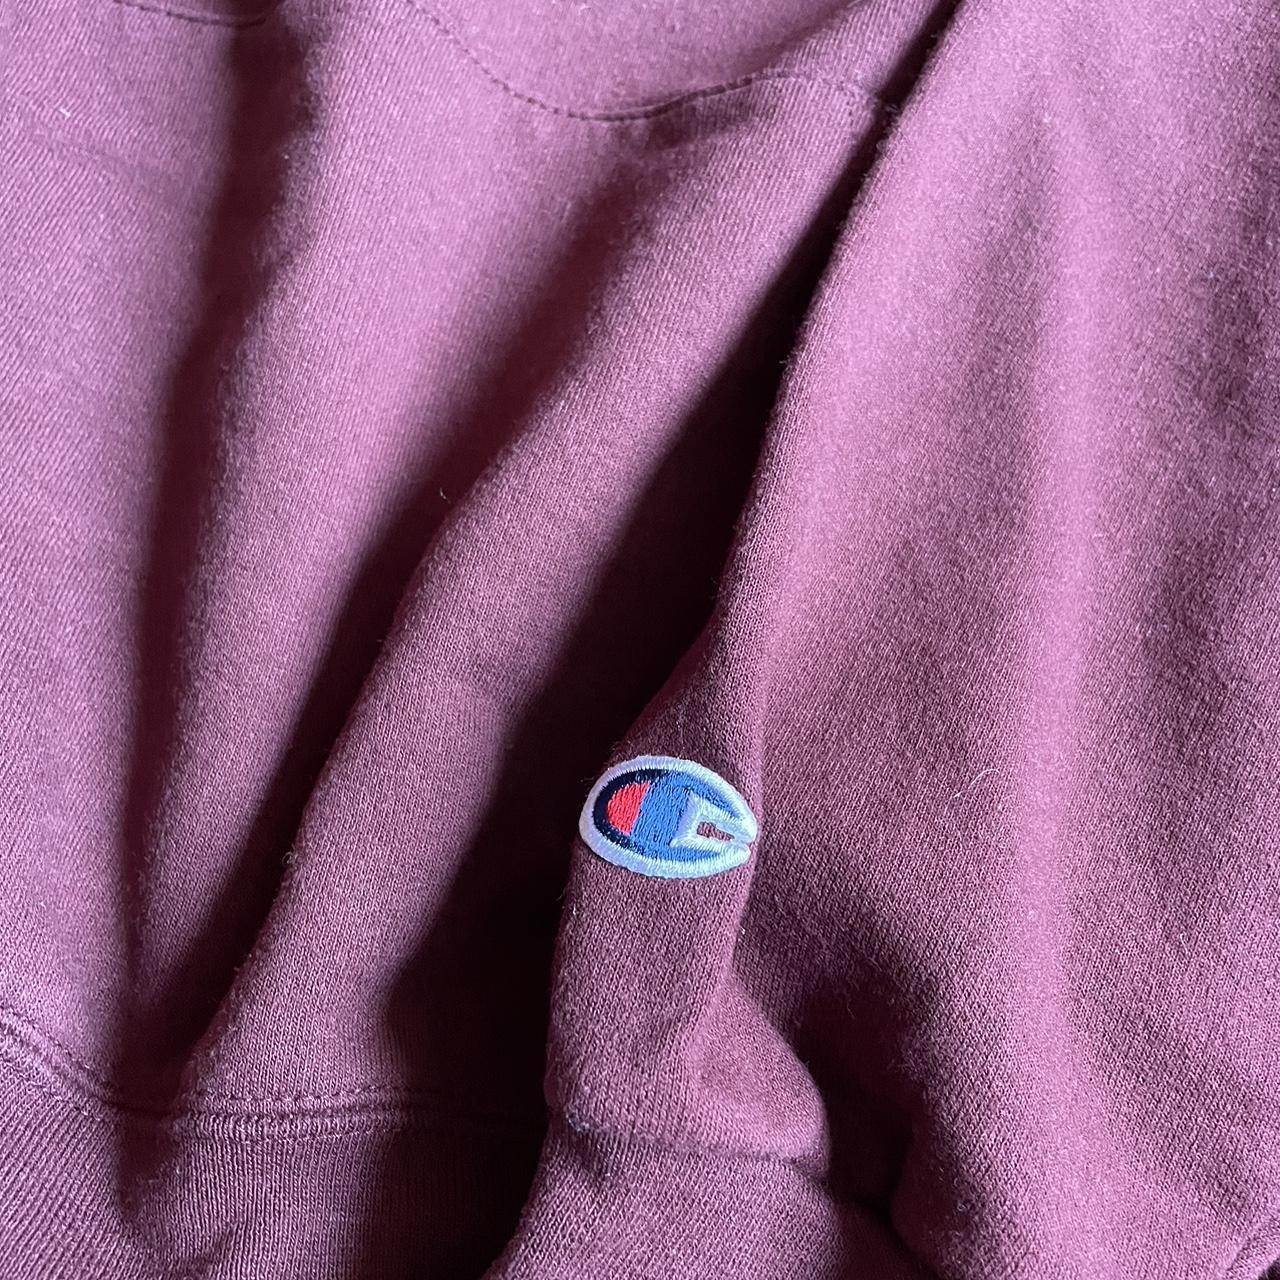 Vintage champion sweater/hoodie from The University... - Depop